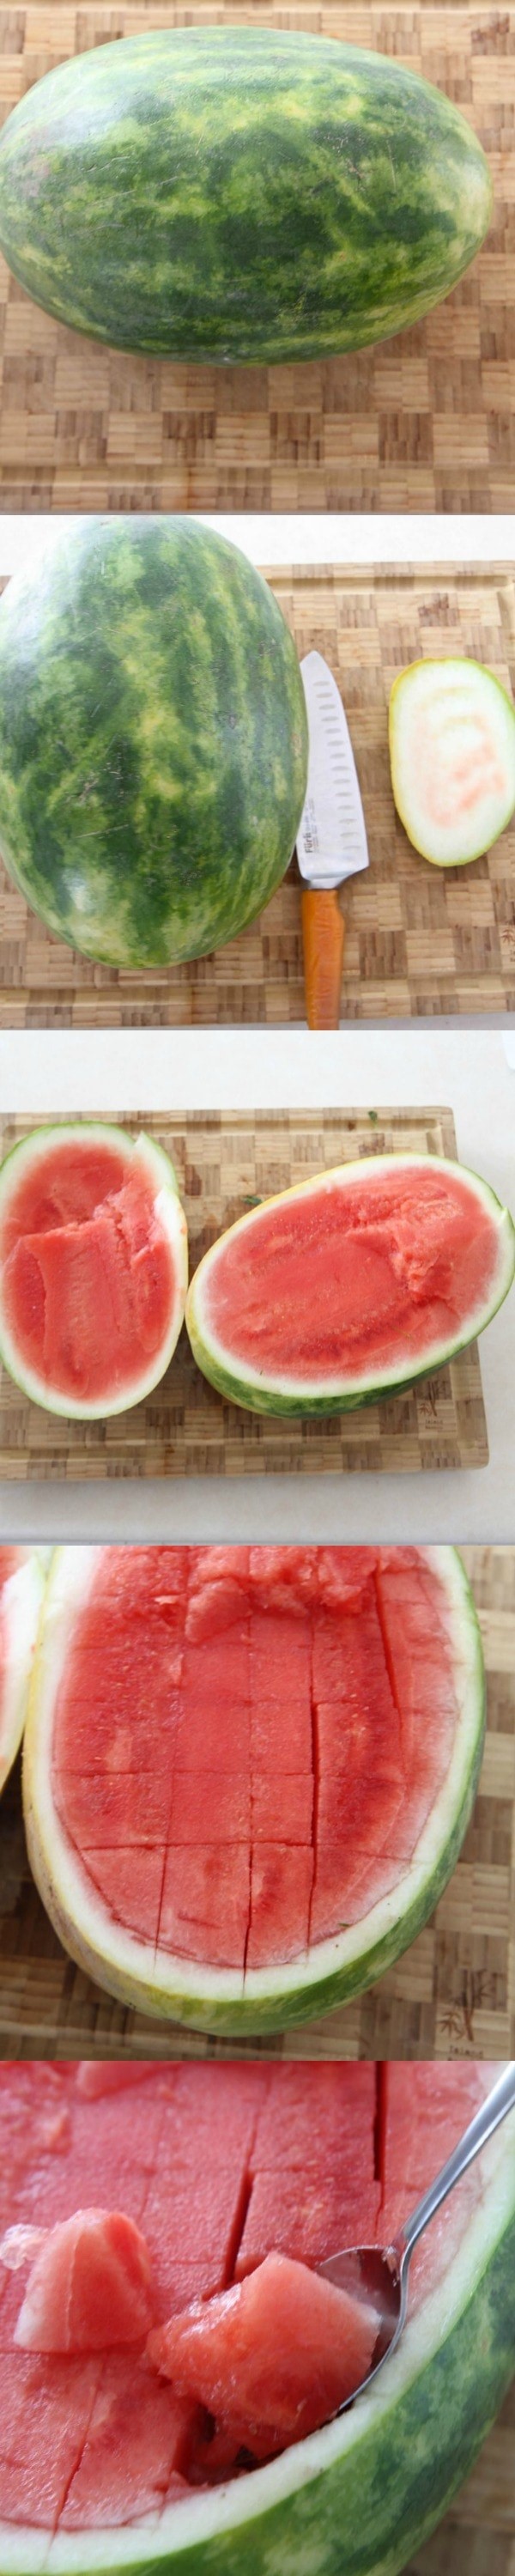 How to Make a Watermelon Pirate Ship from MomAdvice.com.